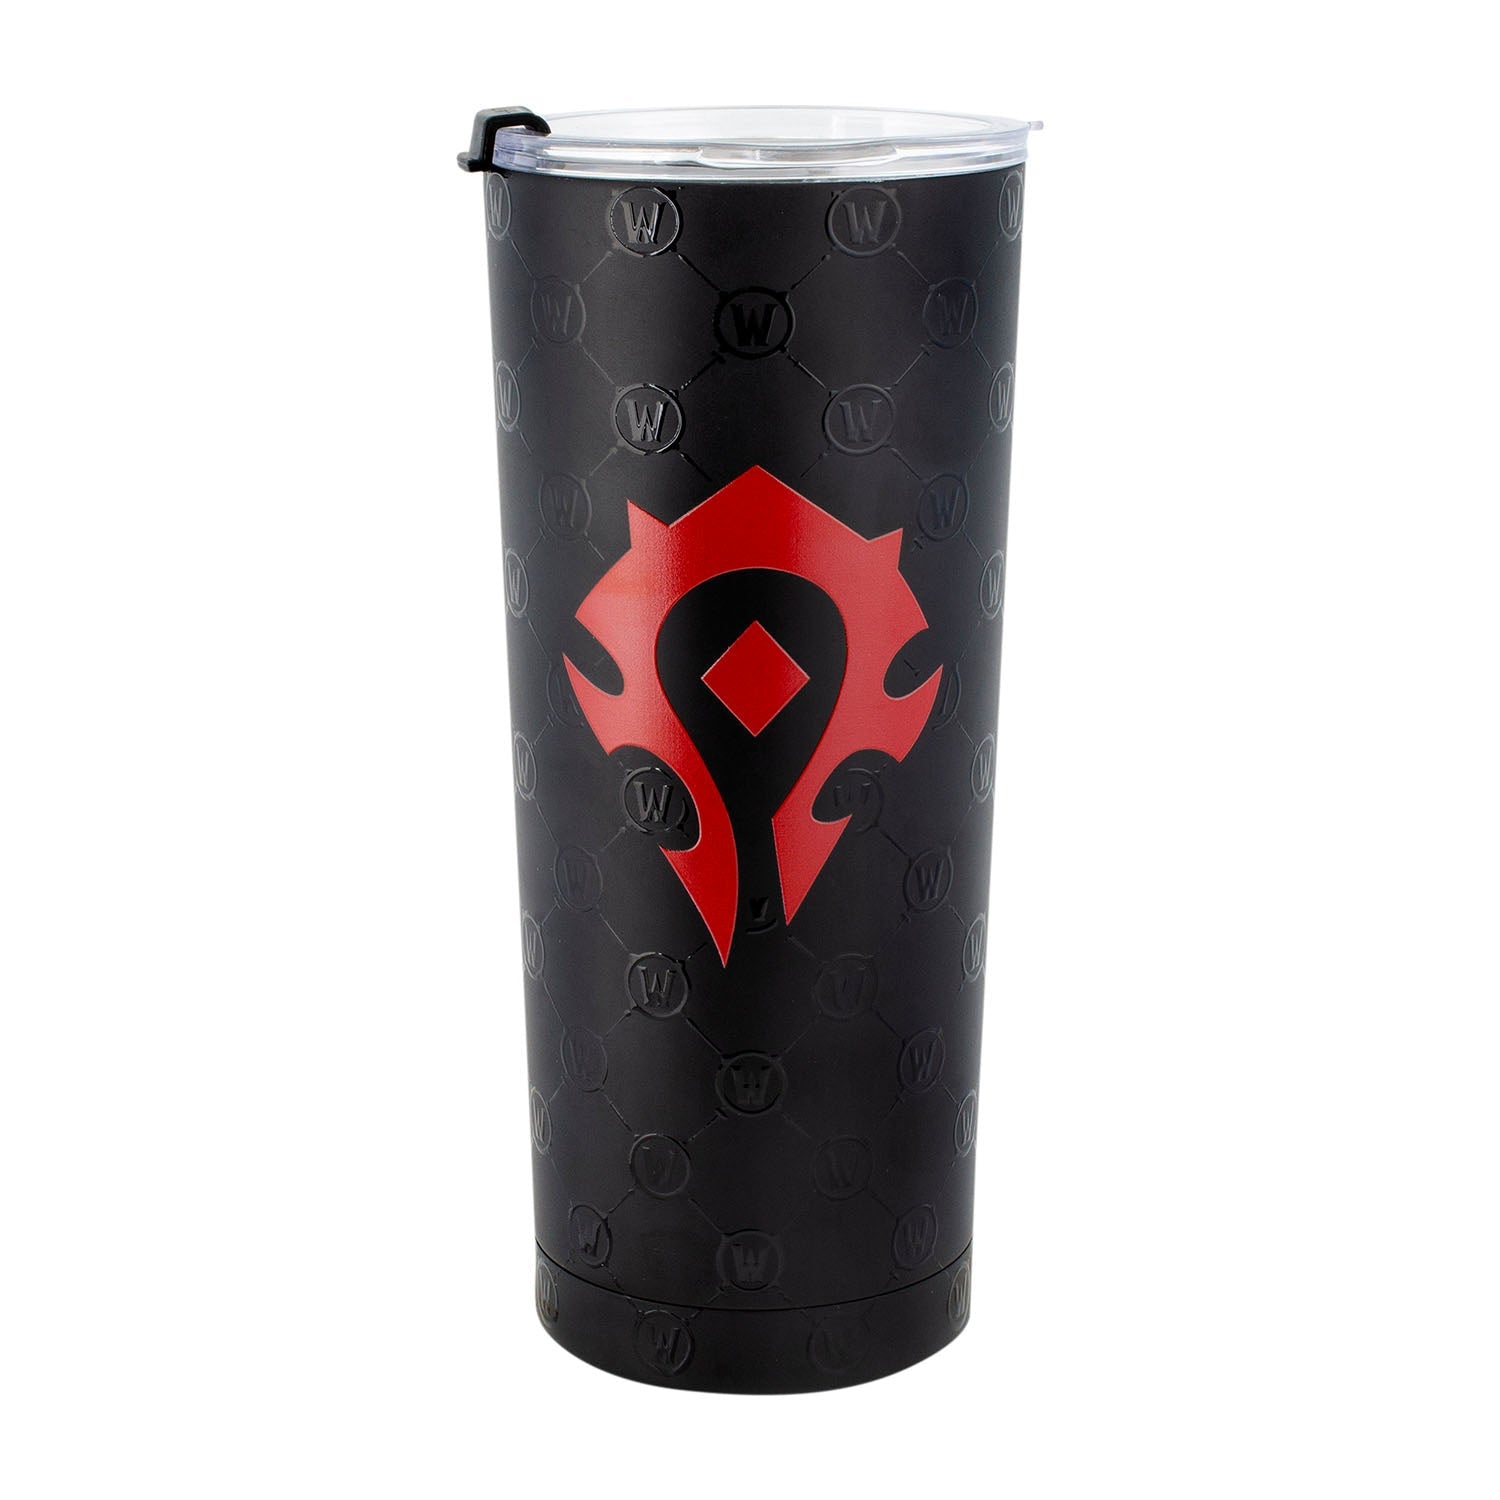 World of Warcraft Horde 650ml Stainless Steel Tumbler in Red and Black - Front View